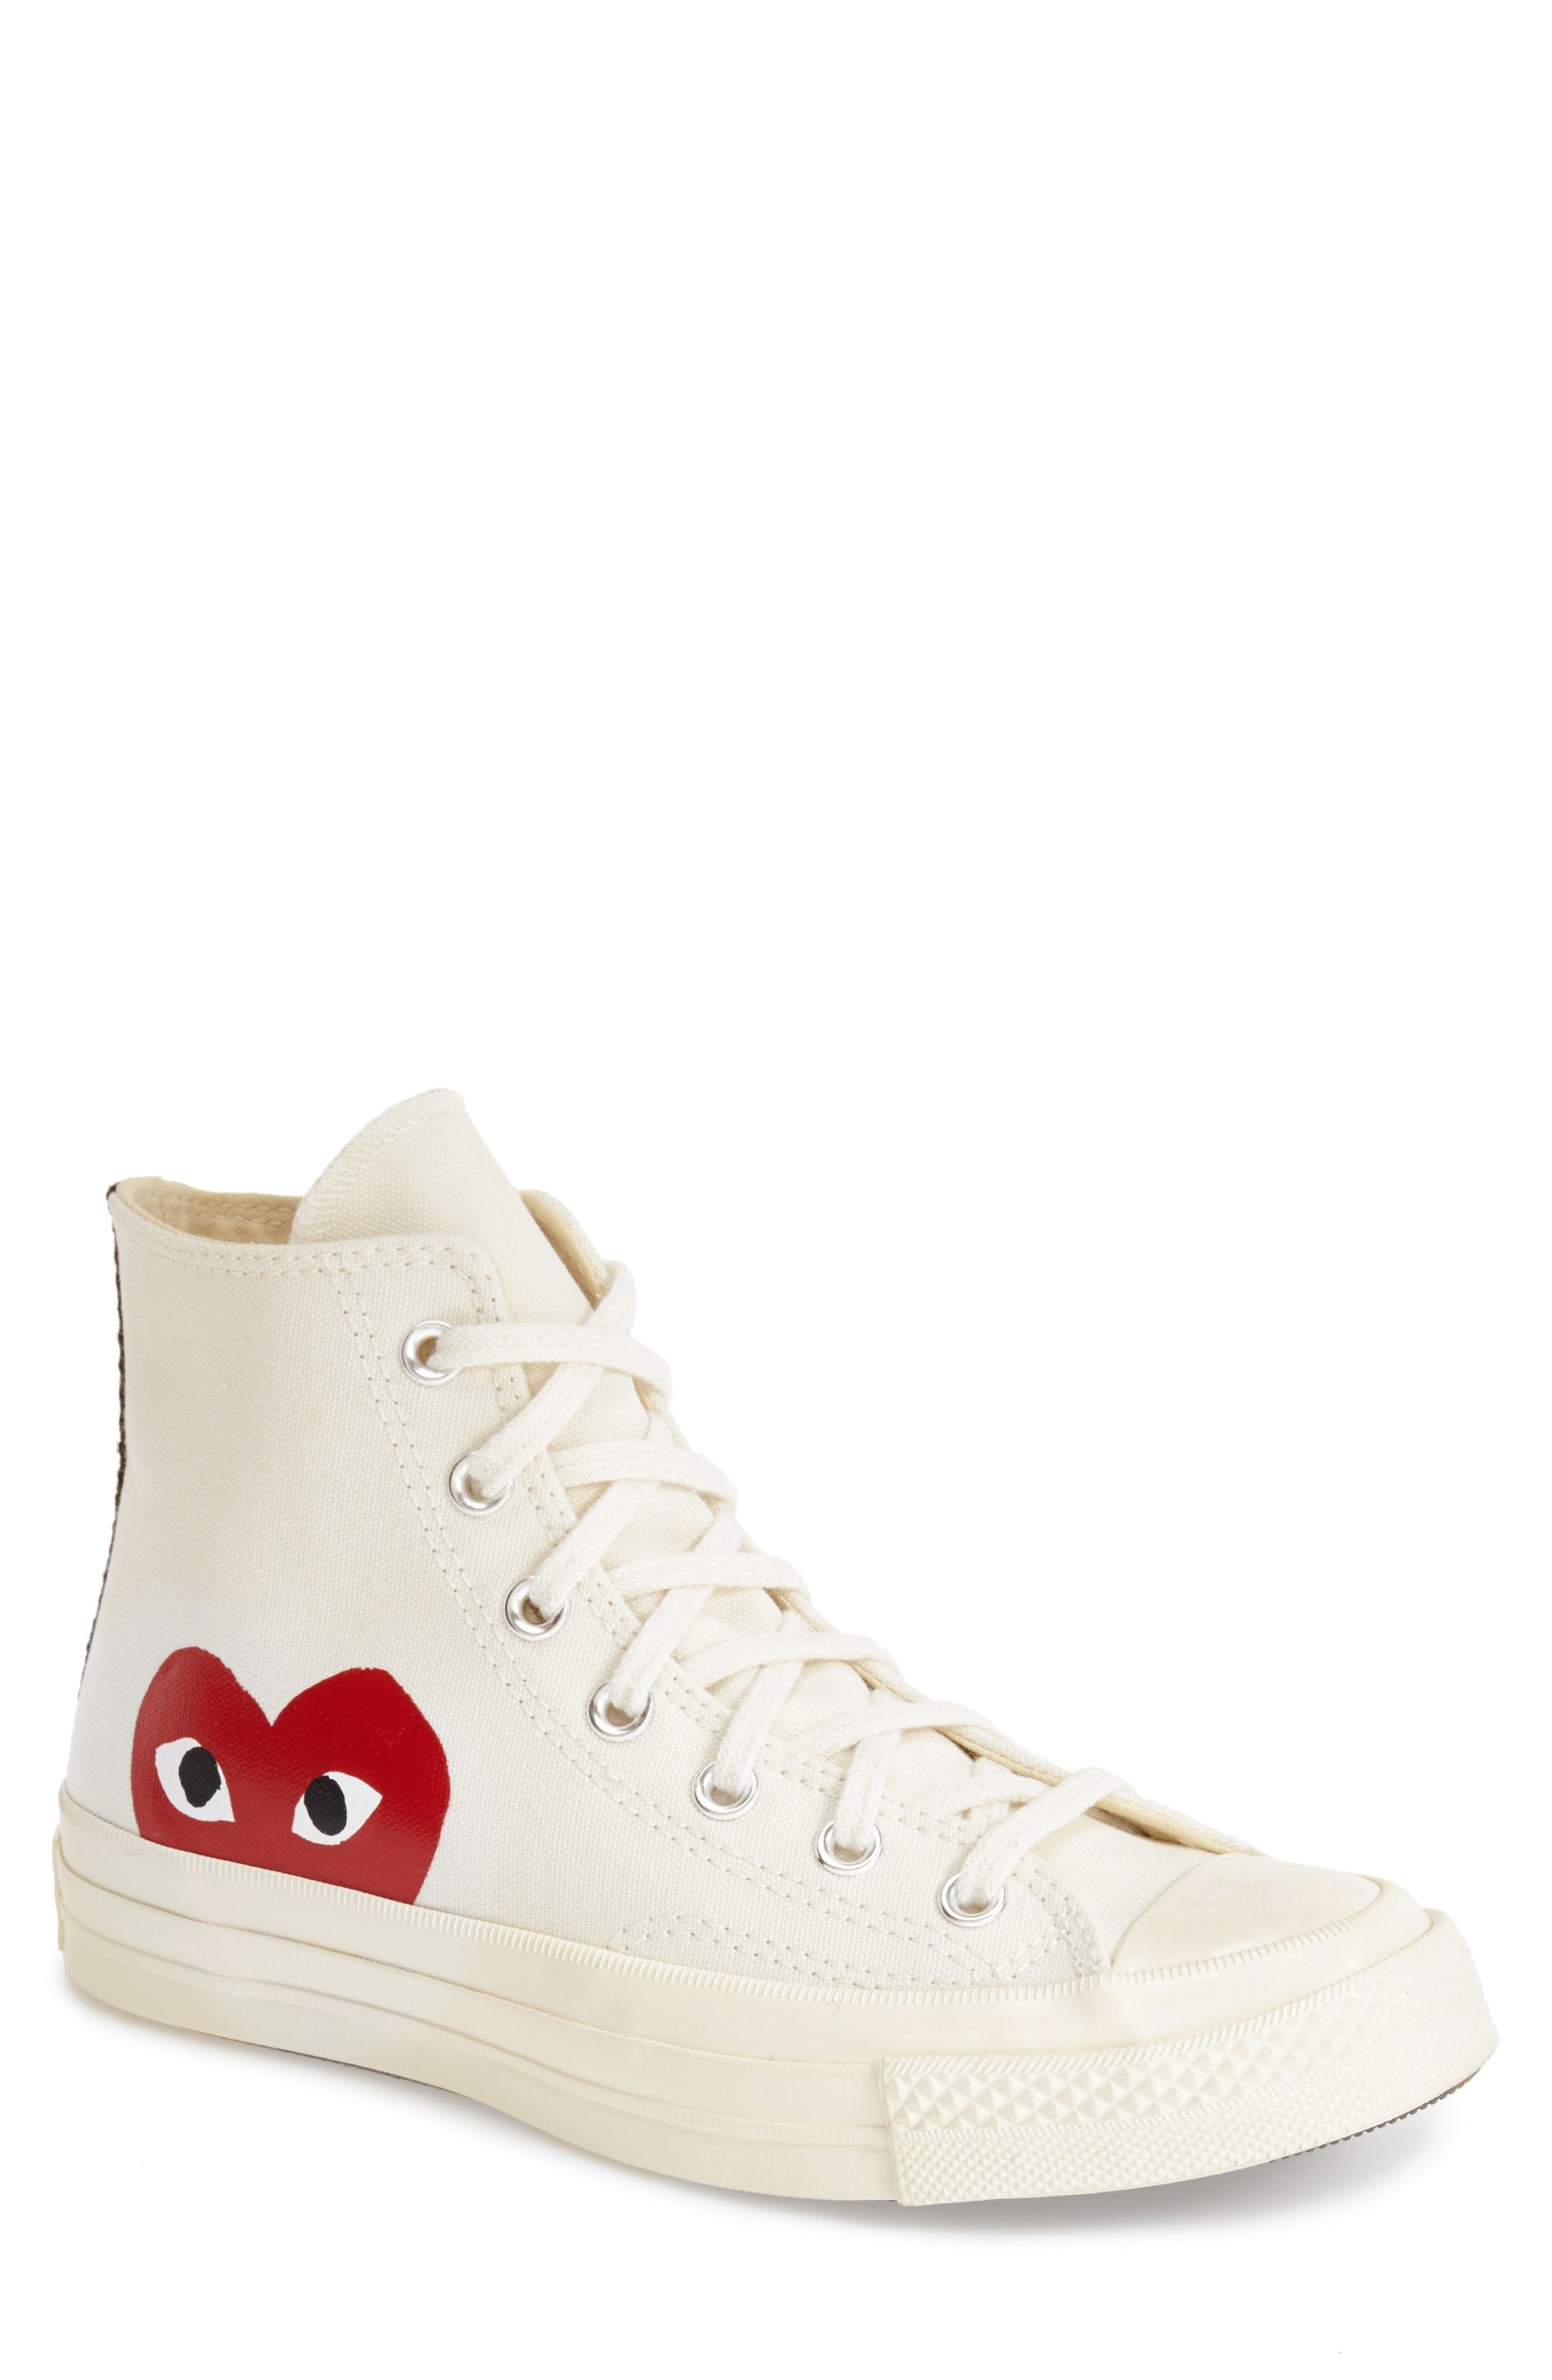 converse with a heart on it